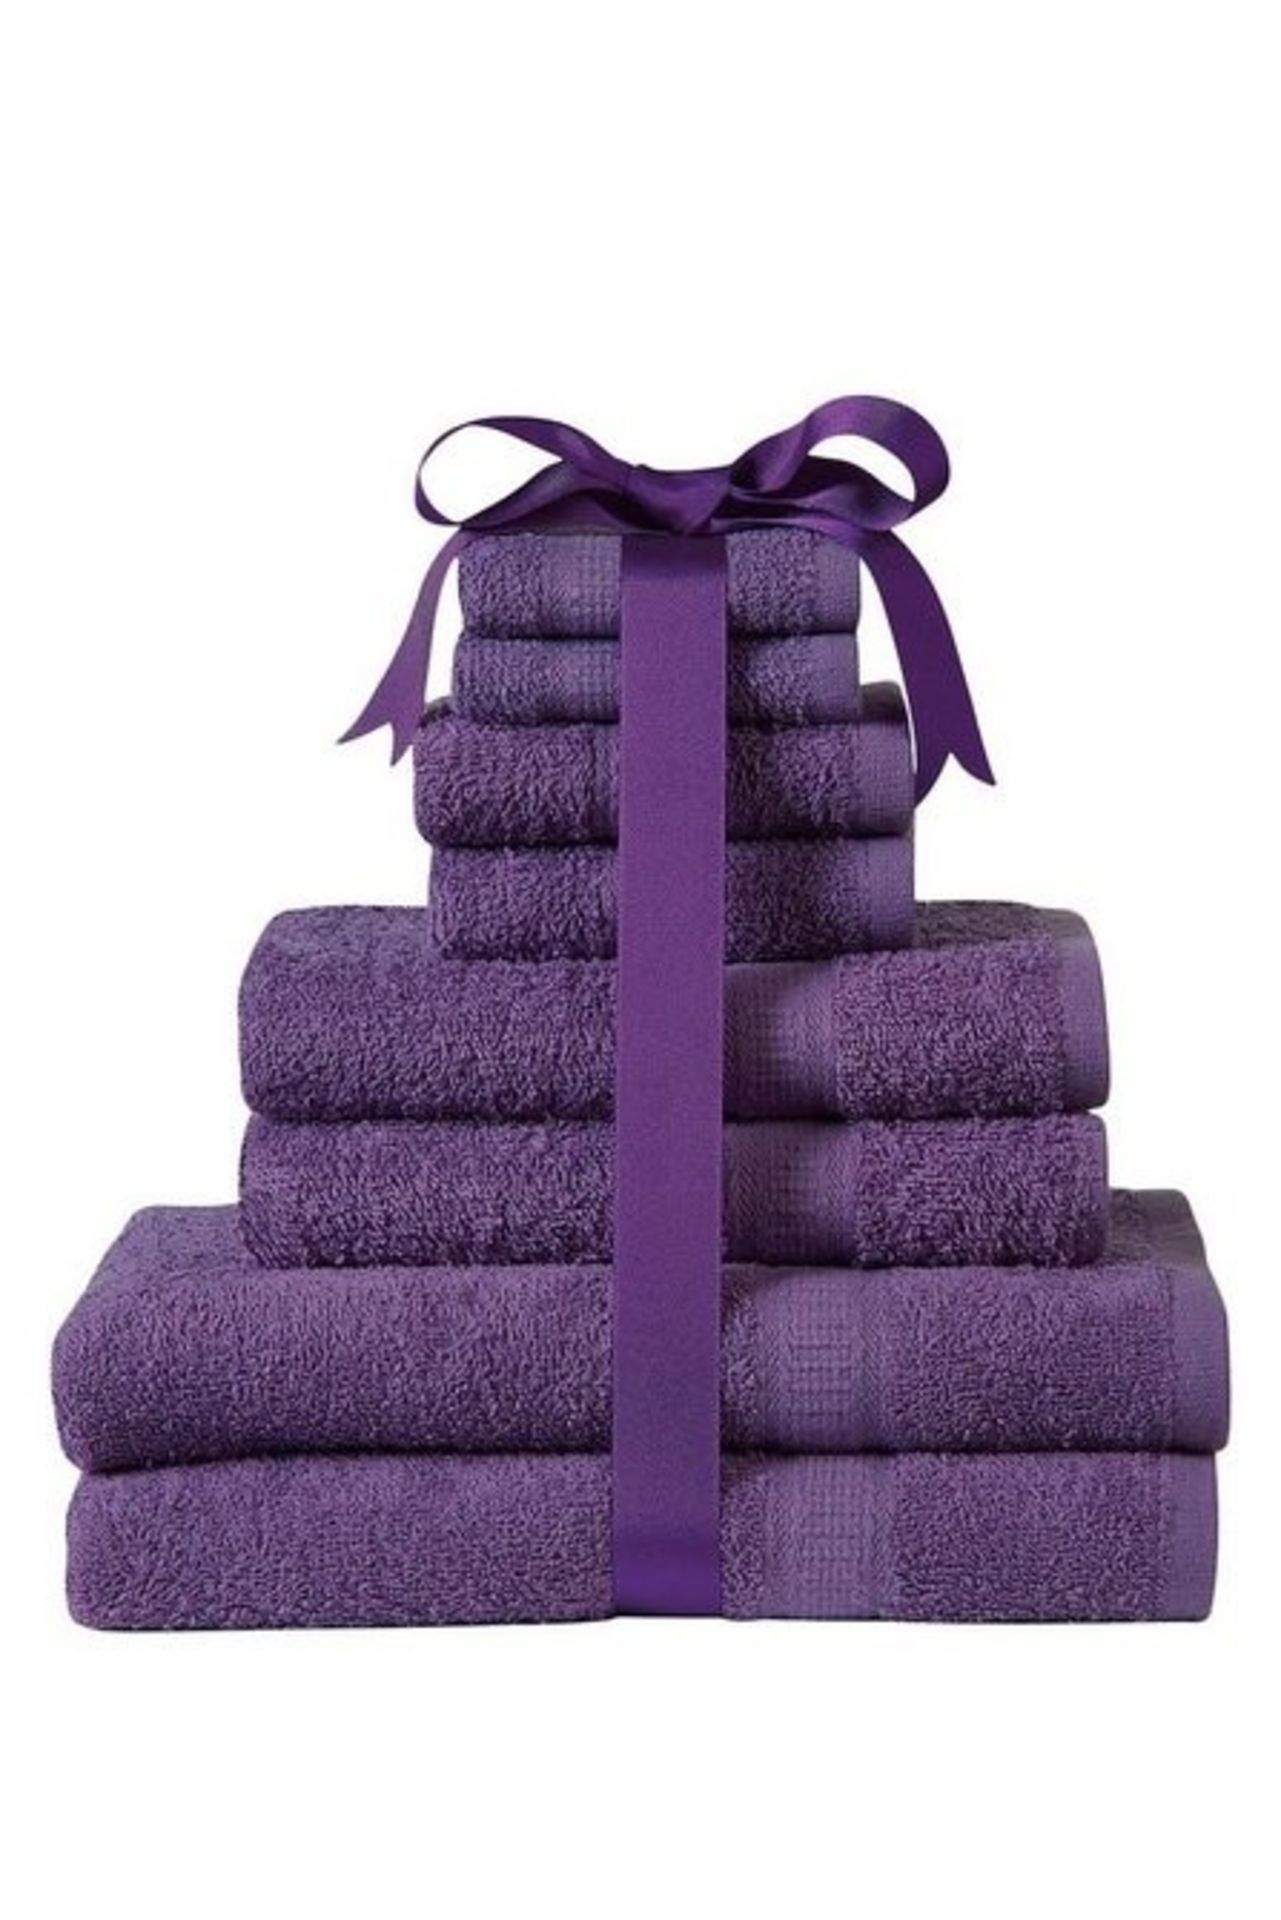 1 BAGGED KINGSLEY 8 PIECE TOWEL BALE IN PLUM (PUBLIC VIEWING AVAILABLE)